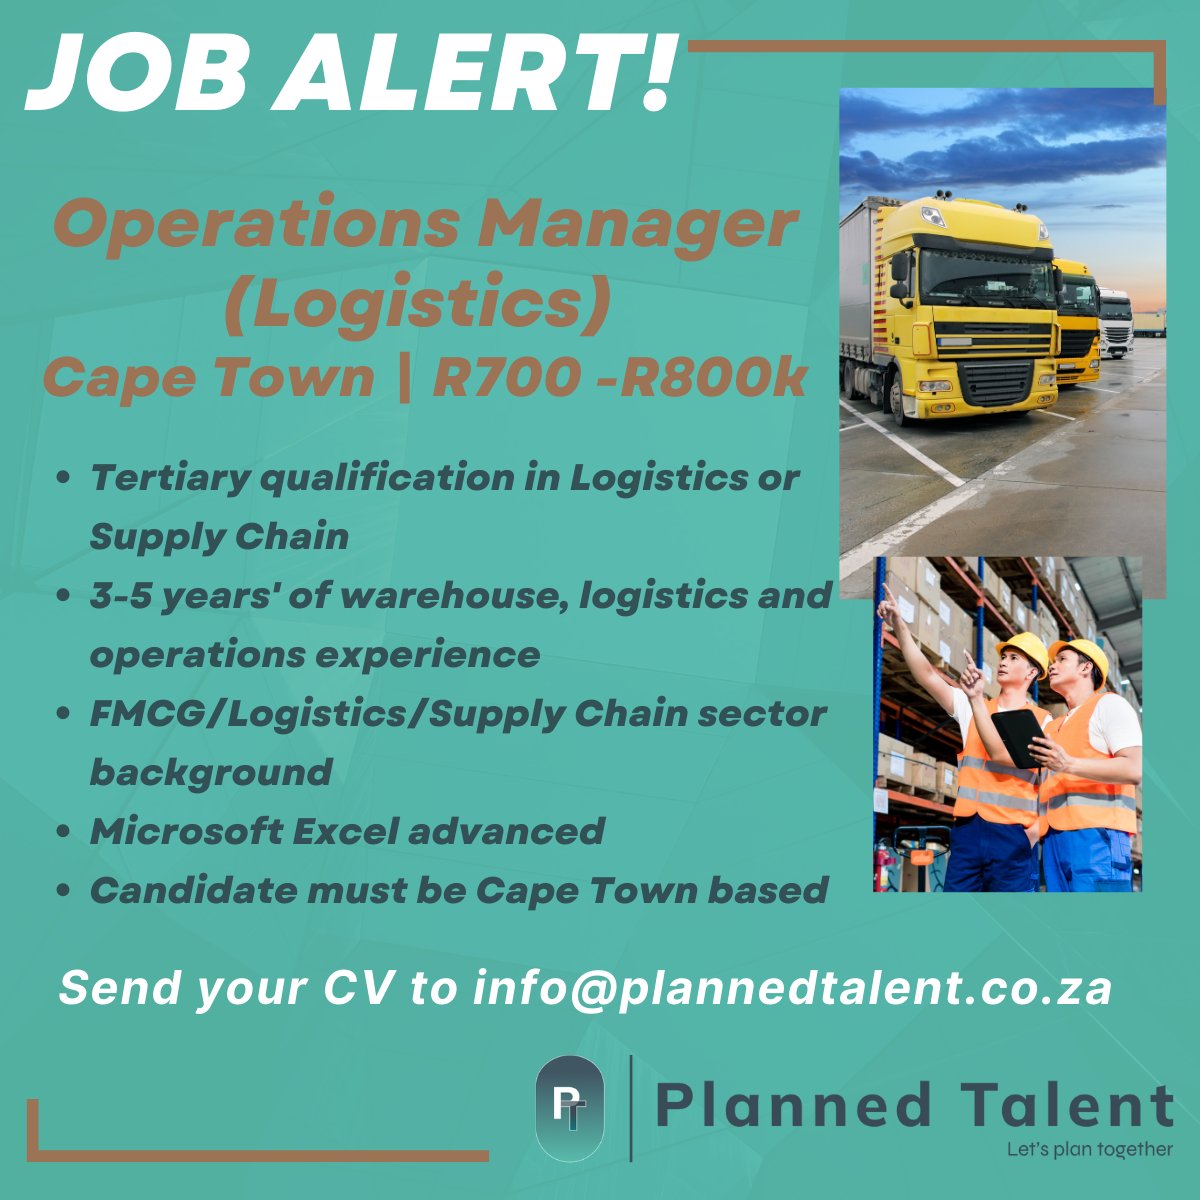 Job Alert! 📢
#wearehiring an Operations Manager in Cape Town. Reach out to Michelle Snyman today!
#operationsmanager #logisticsjobs #supplychainjobs